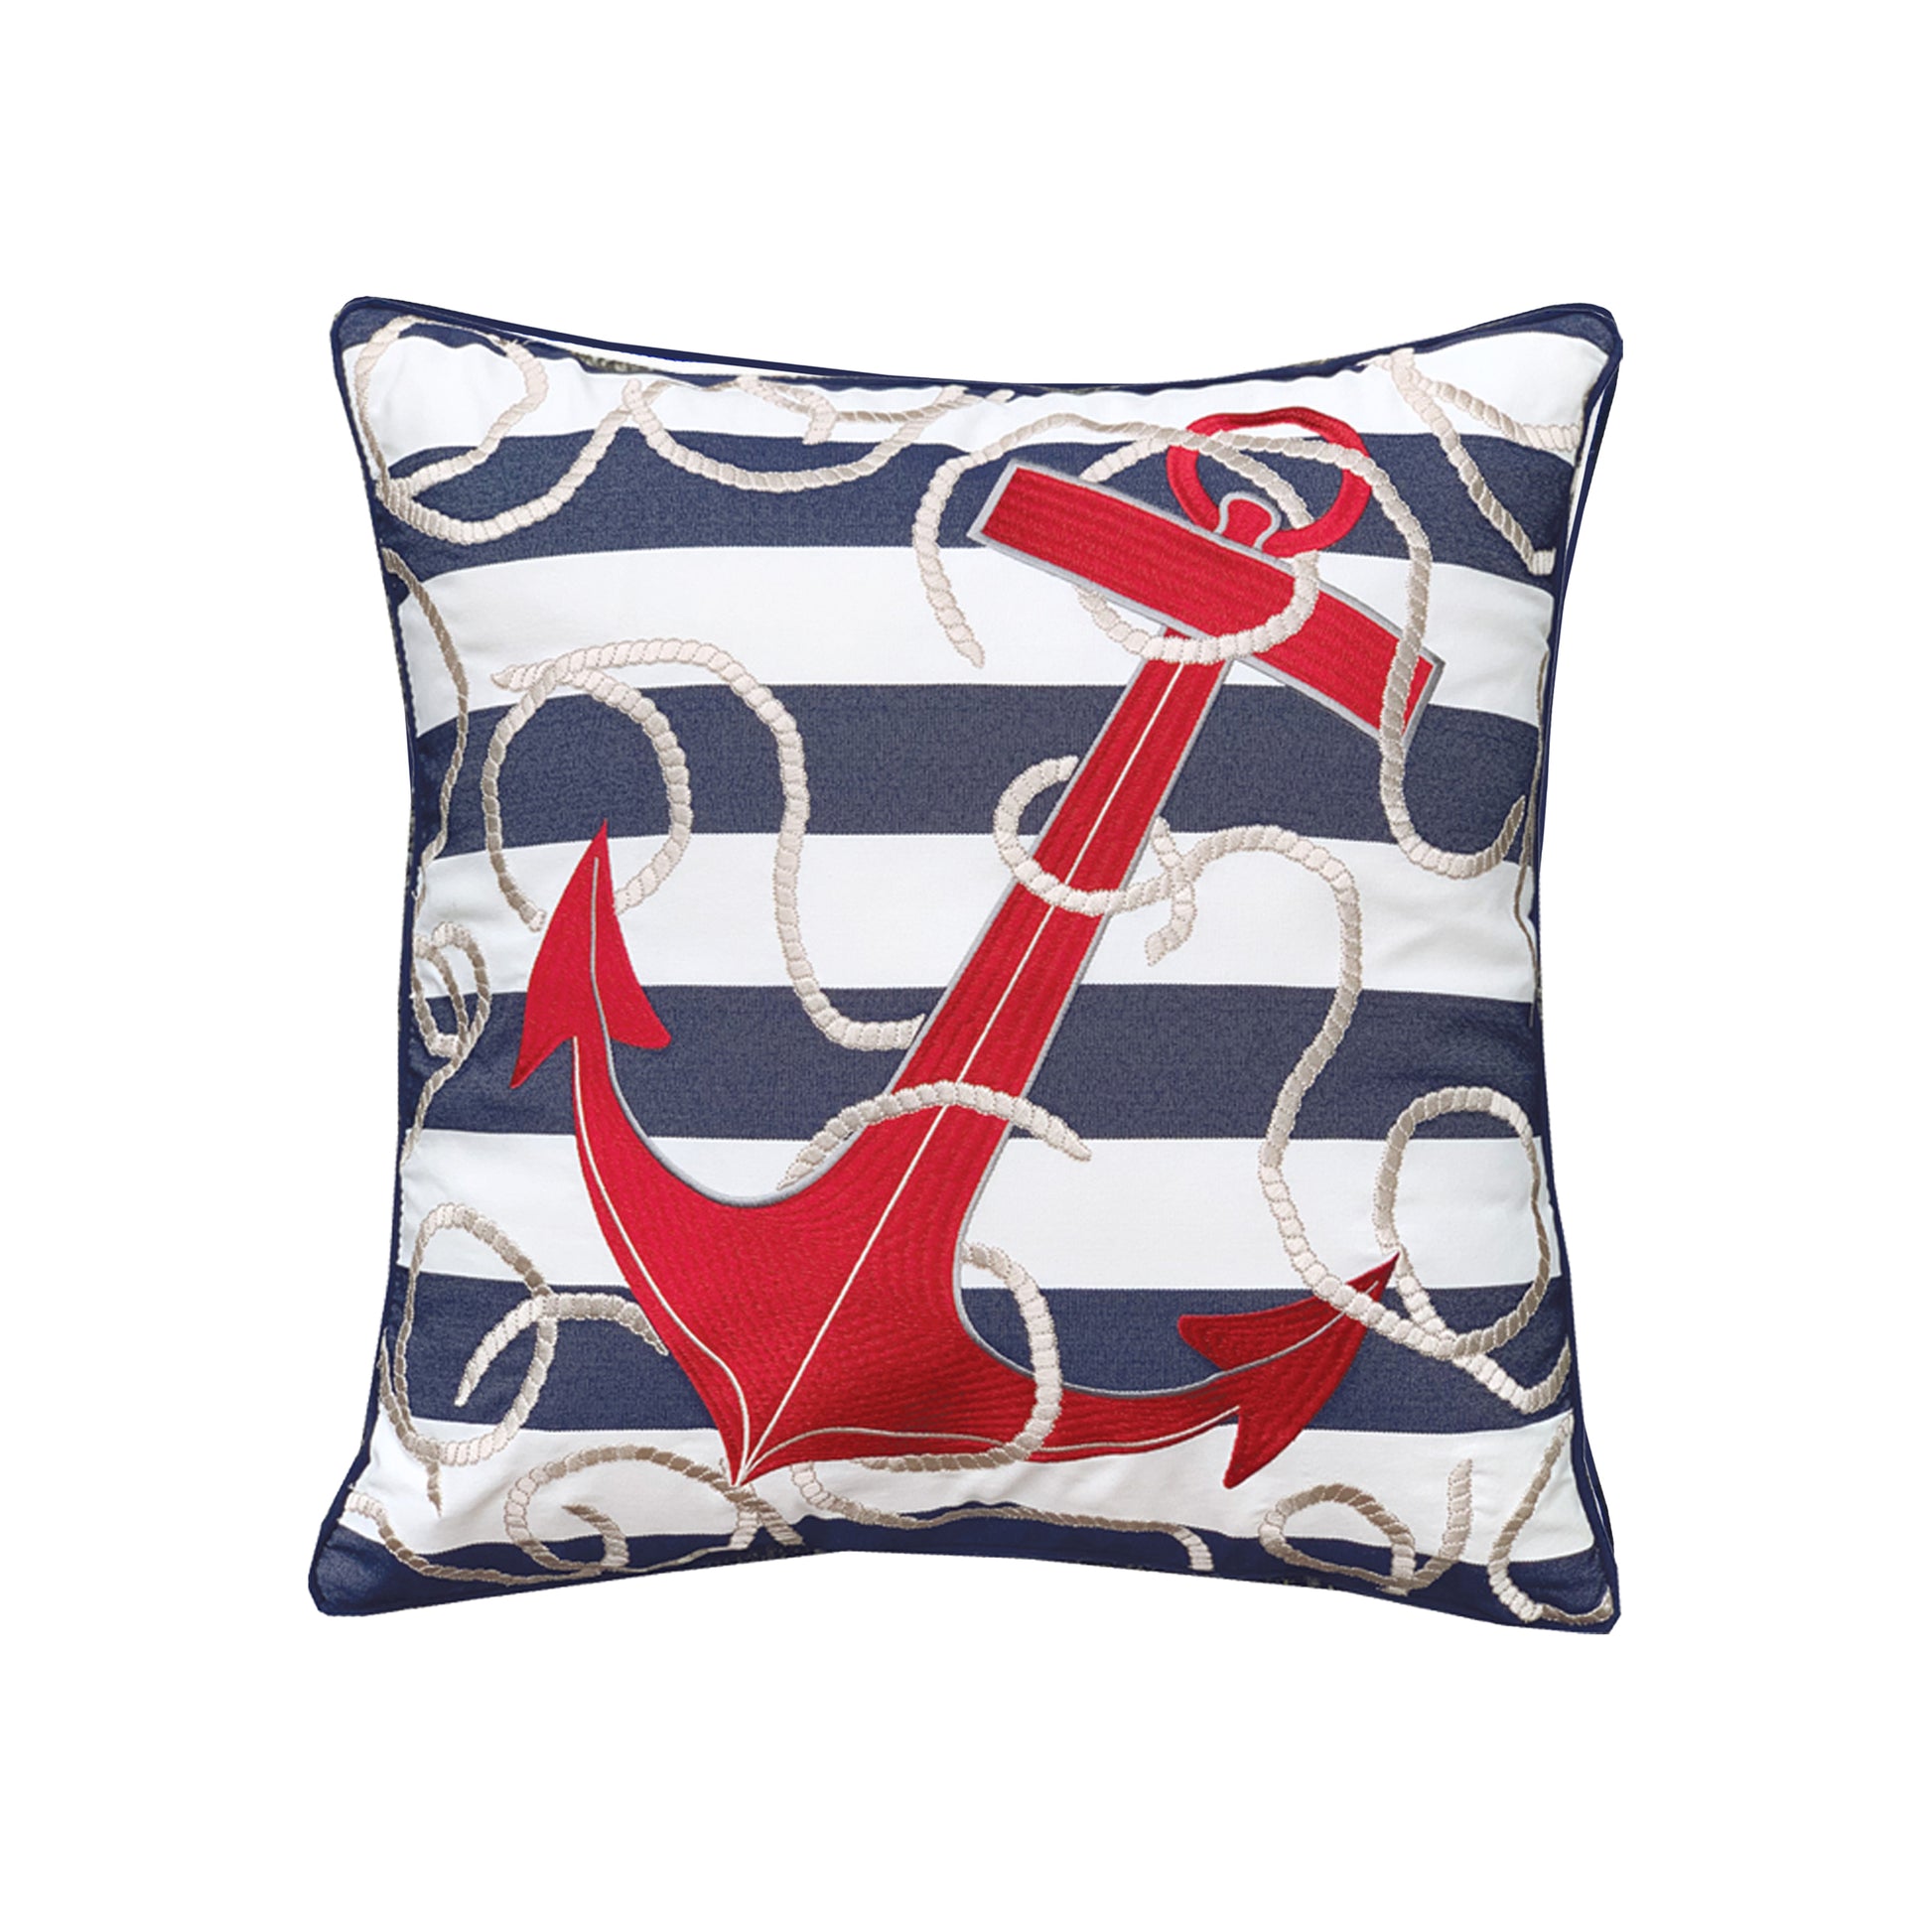 Red anchor tangled in white rope embroidered on a printed blue and white pillow with blue piped edging.